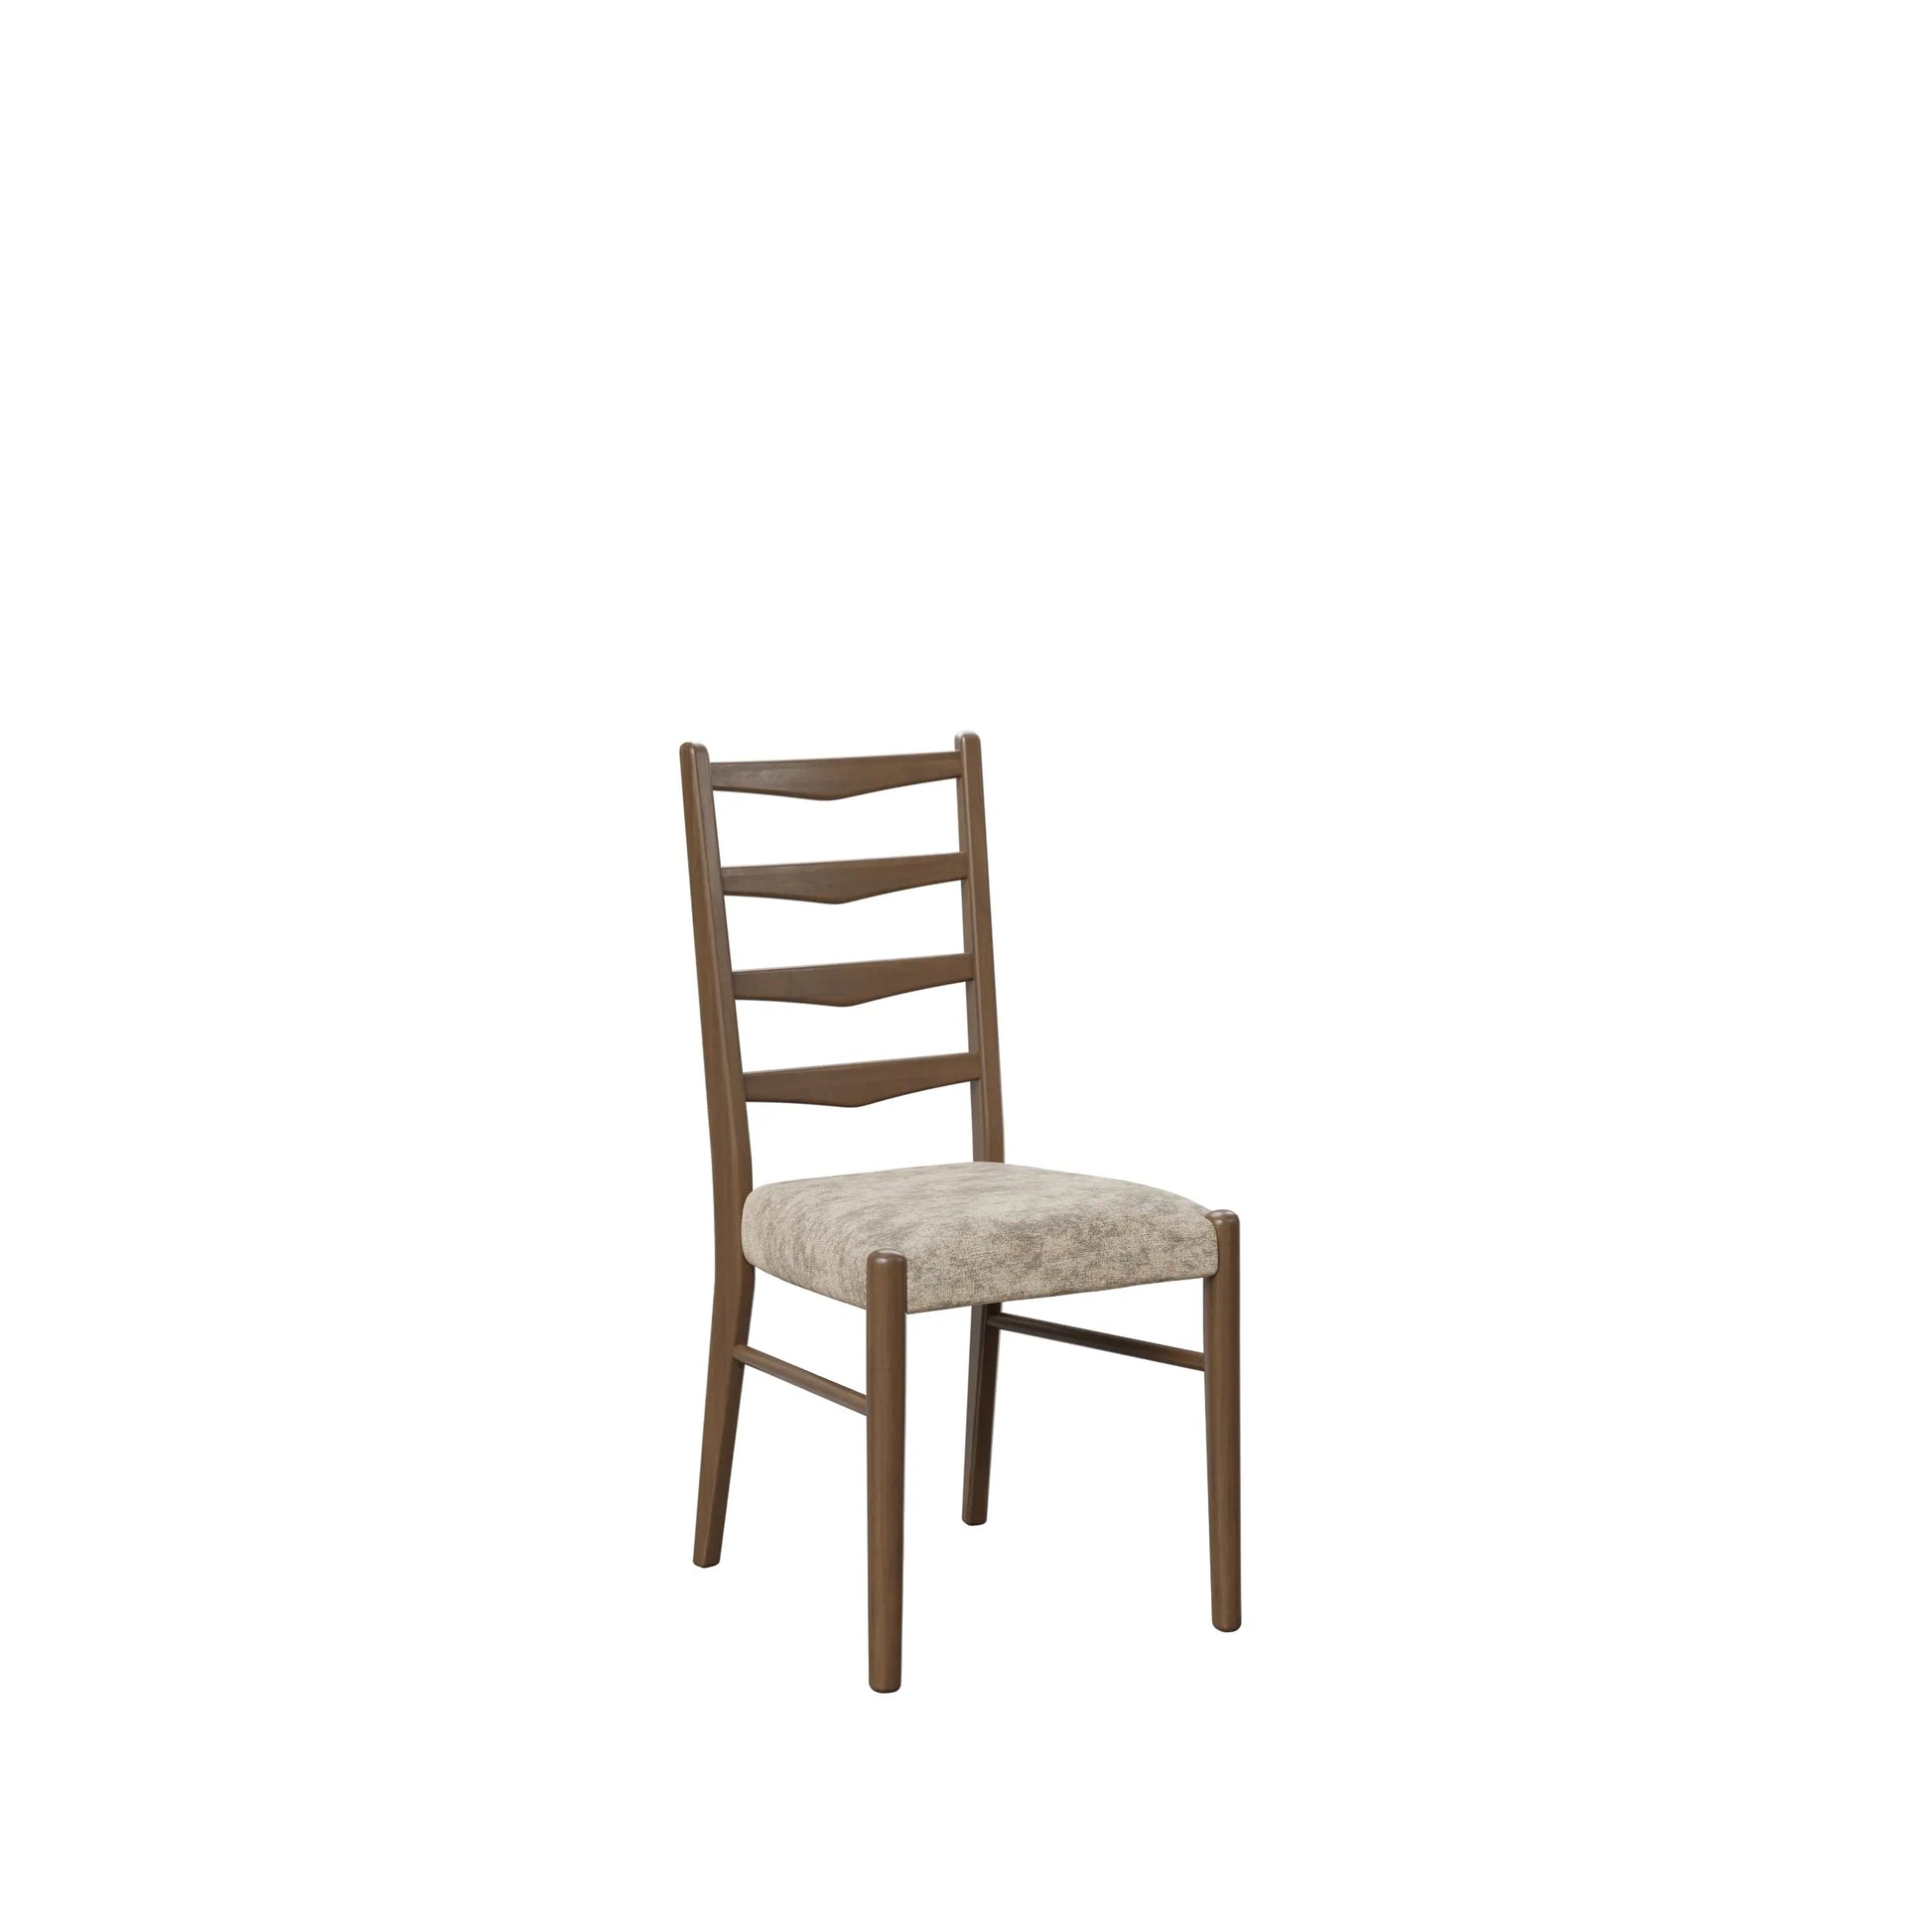 The Vista - Modern Dining Chair or Bench Moderncre8ve